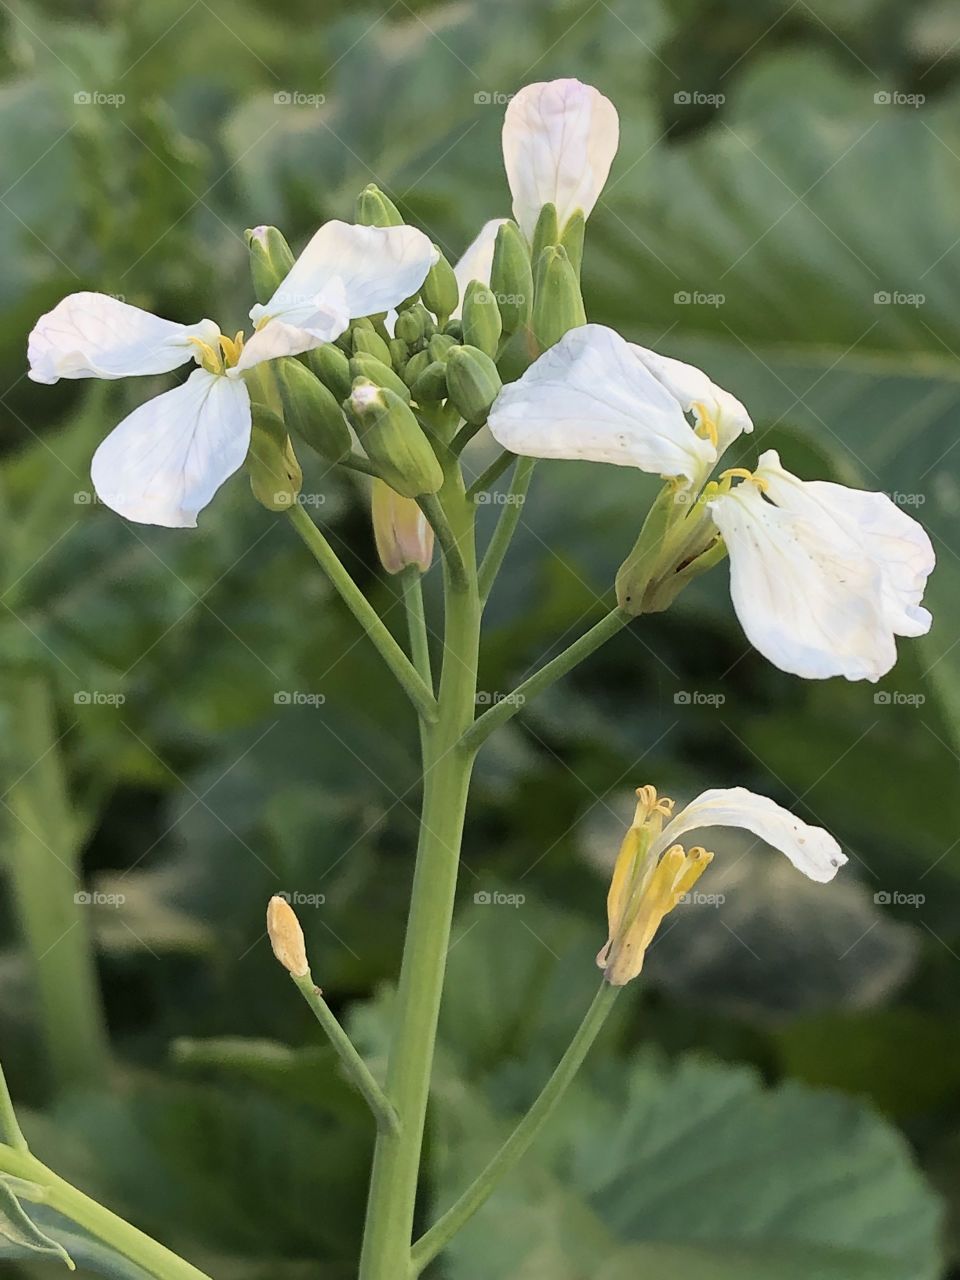 Mustard plant with white flower closeup 